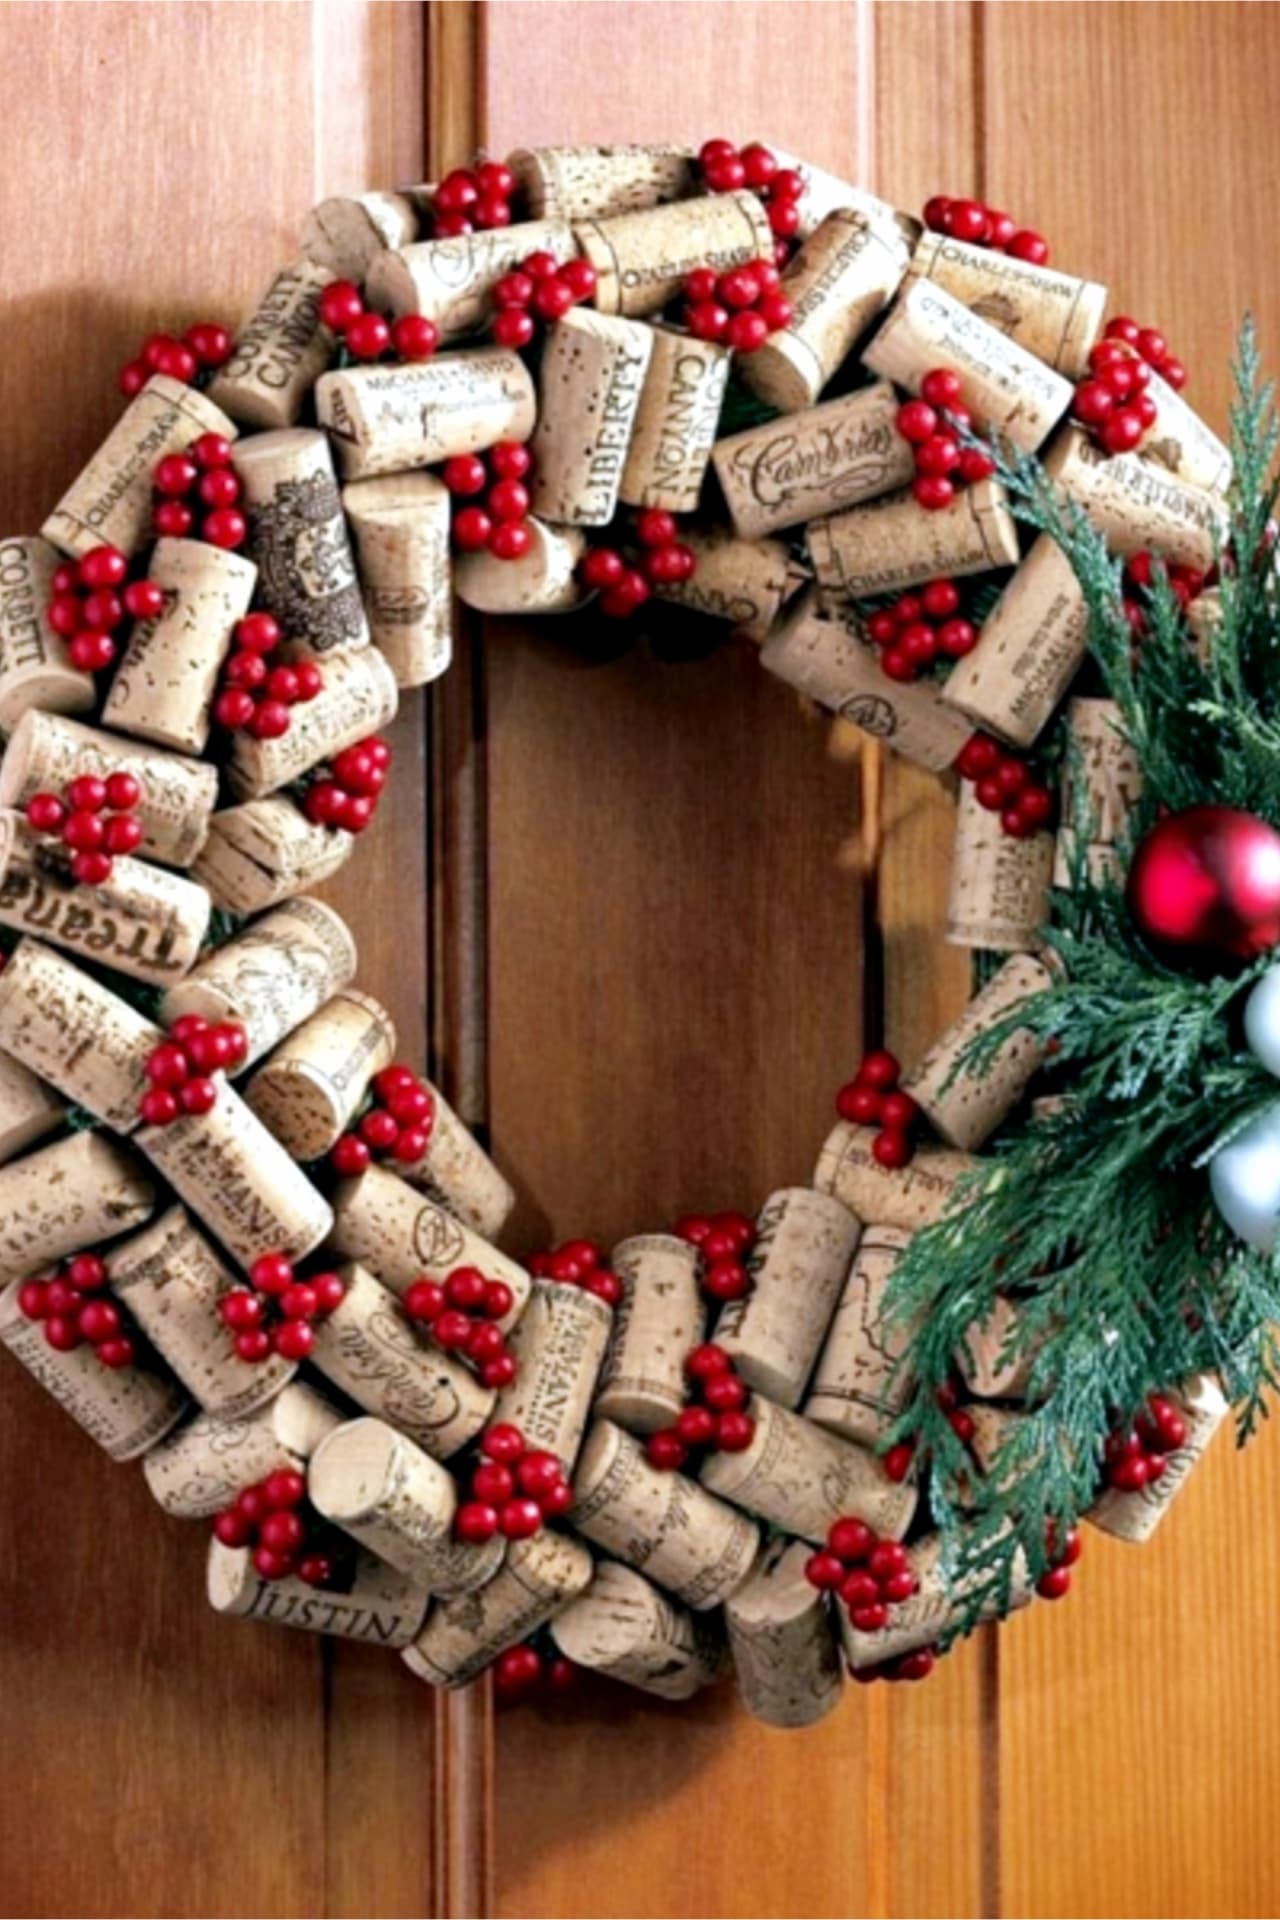 DIY Christmas wreath ideas to make for Christmas on a Budget - make a Christmas wreath for your front door or for a gift out of wine corks